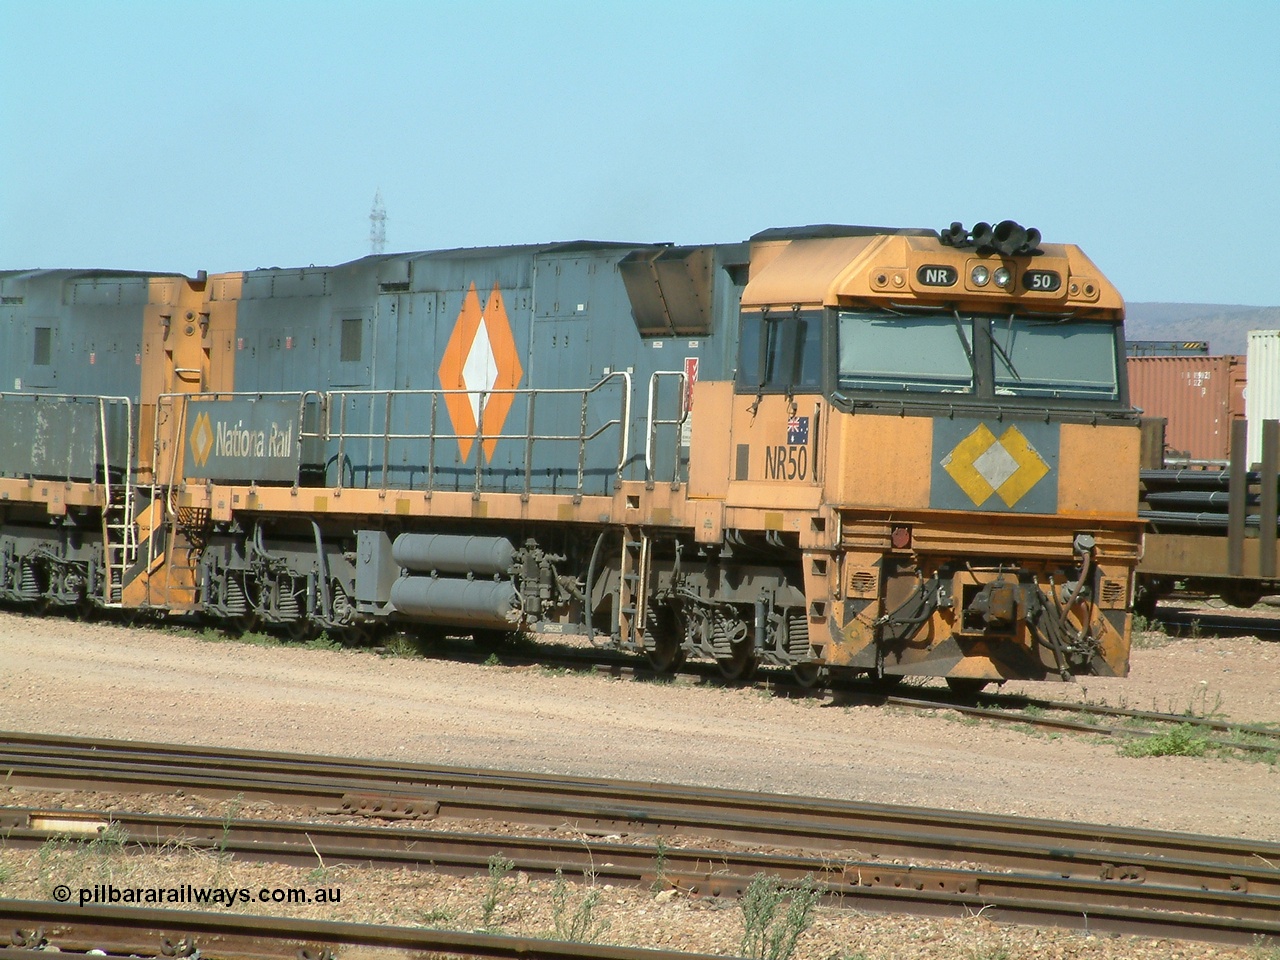 030404 103712
Port Augusta Spencer Junction yard, National Rail Goninan built GE Cv40-9i model NR class unit NR 50 serial 7250-08 / 97-252 lay about the yard in between jobs. 4th April 2003.
Keywords: NR-class;NR50;7250-08/97-252;Goninan;GE;Cv40-9i;